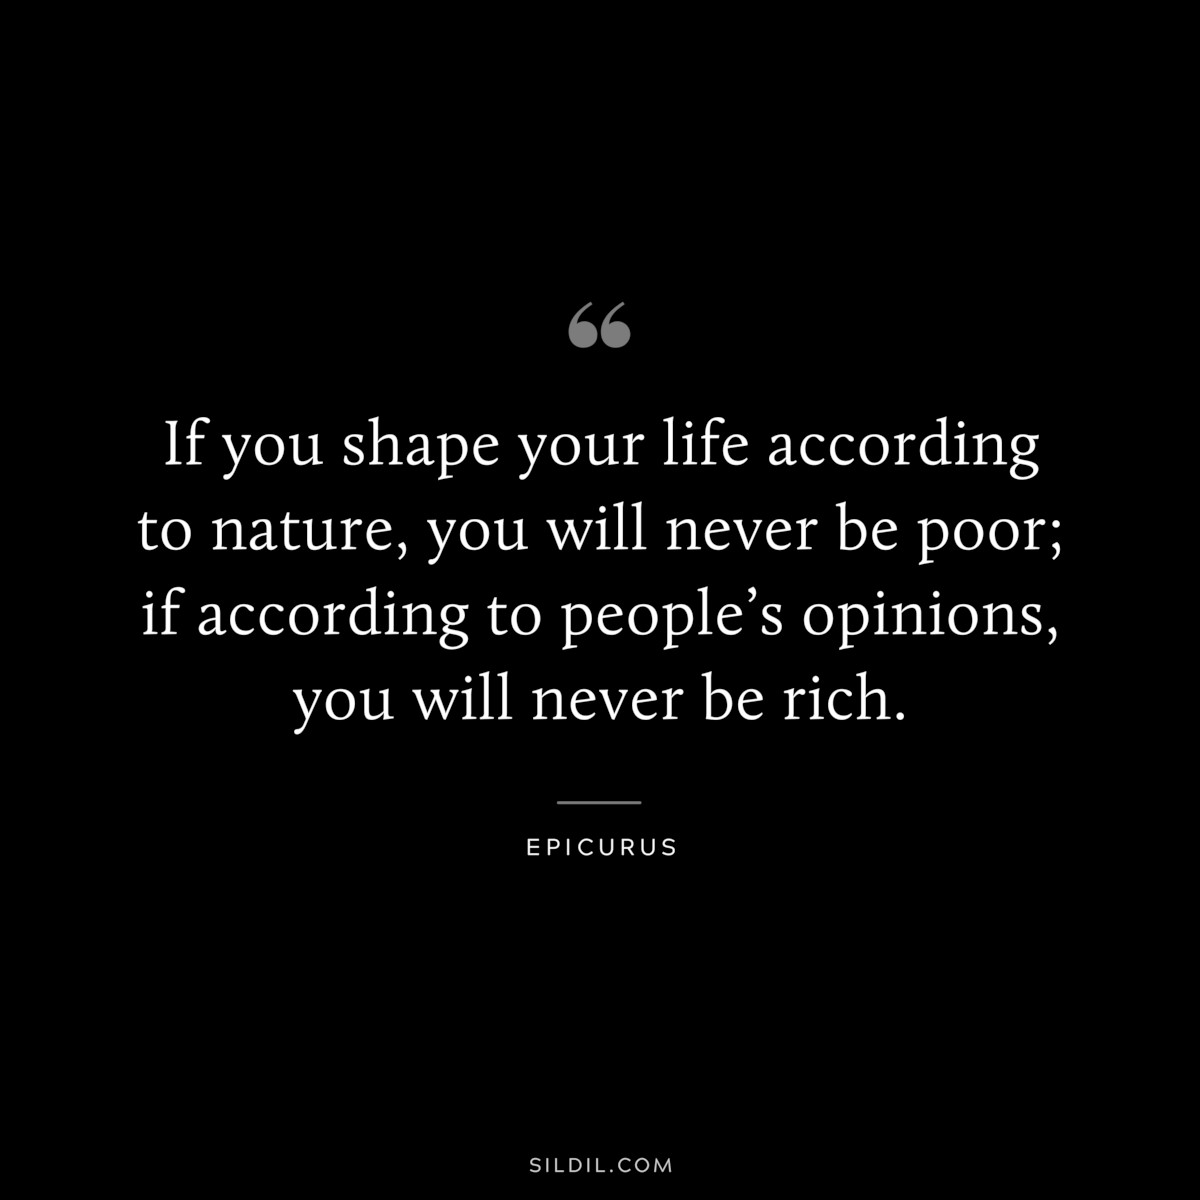 If you shape your life according to nature, you will never be poor; if according to people’s opinions, you will never be rich. — Epicurus